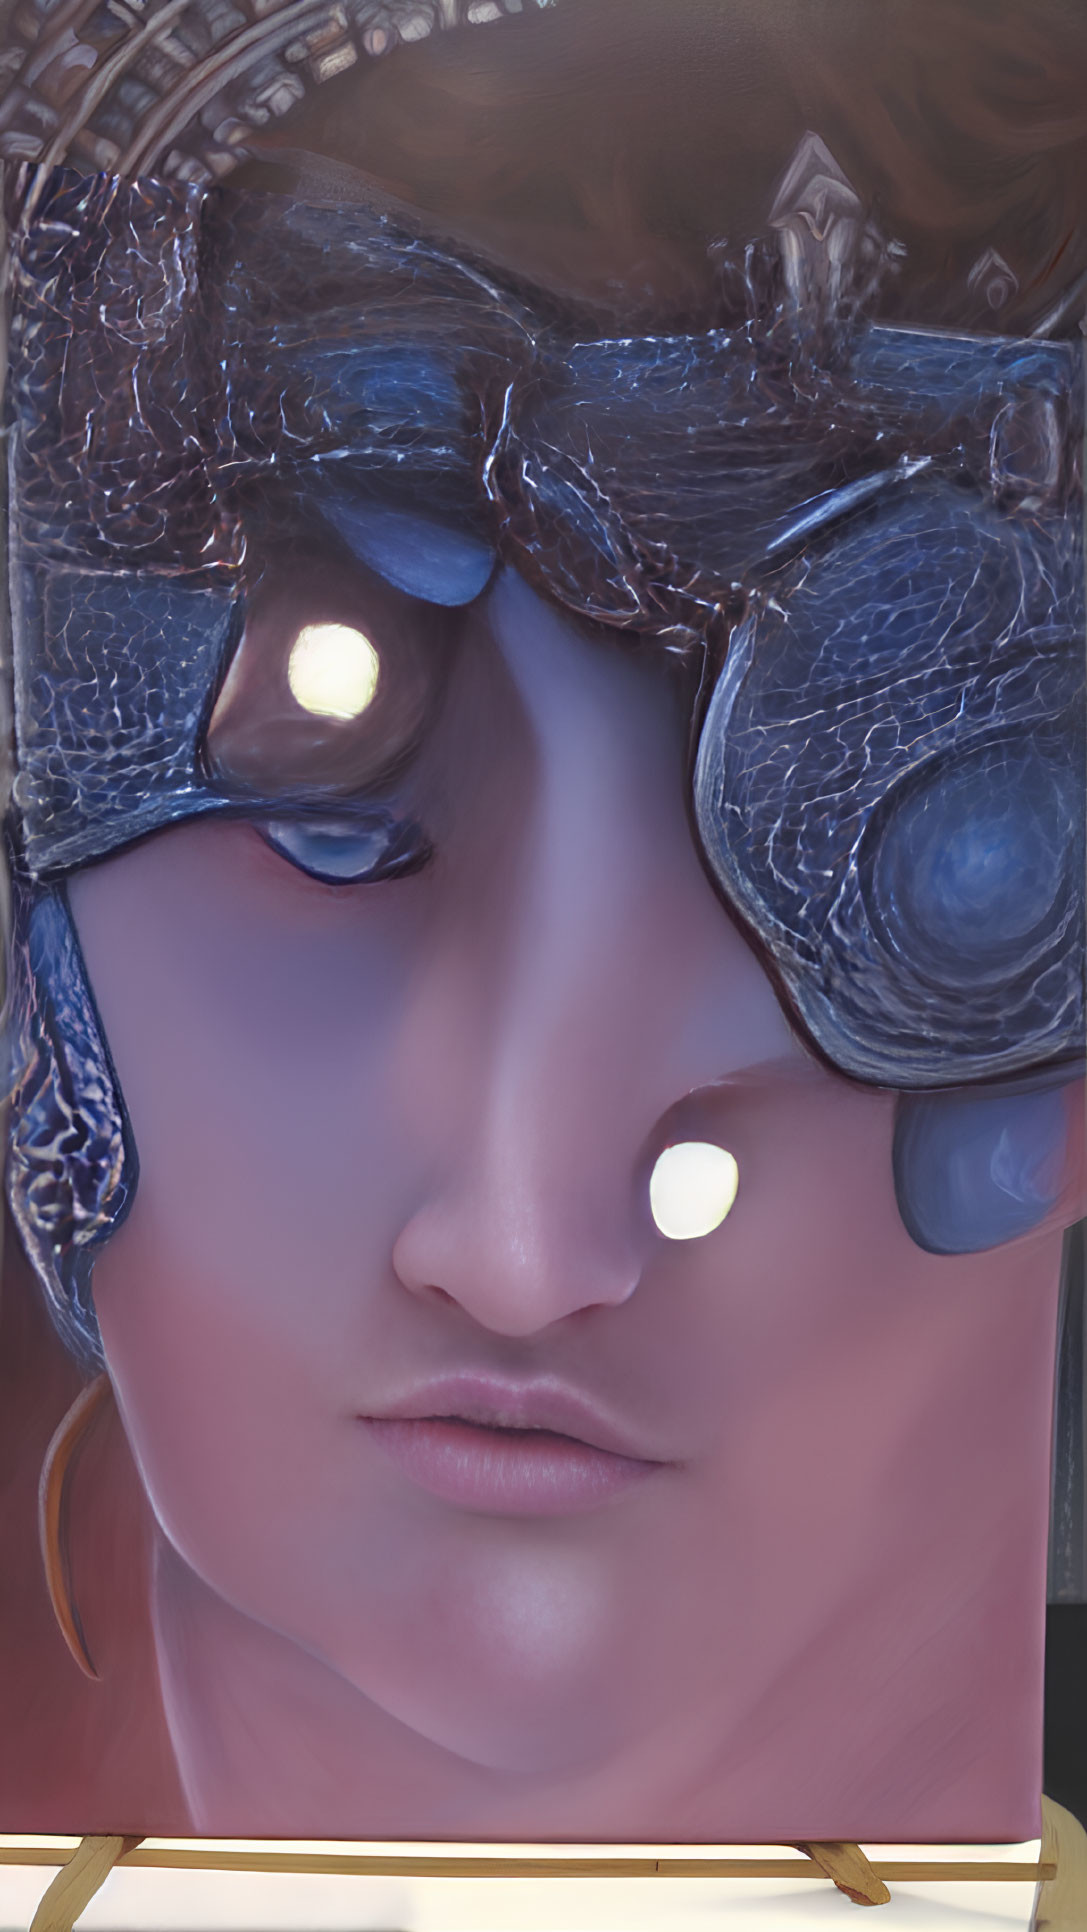 Detailed Close-Up of Female Face Artwork with Blindfold and Glowing Lights